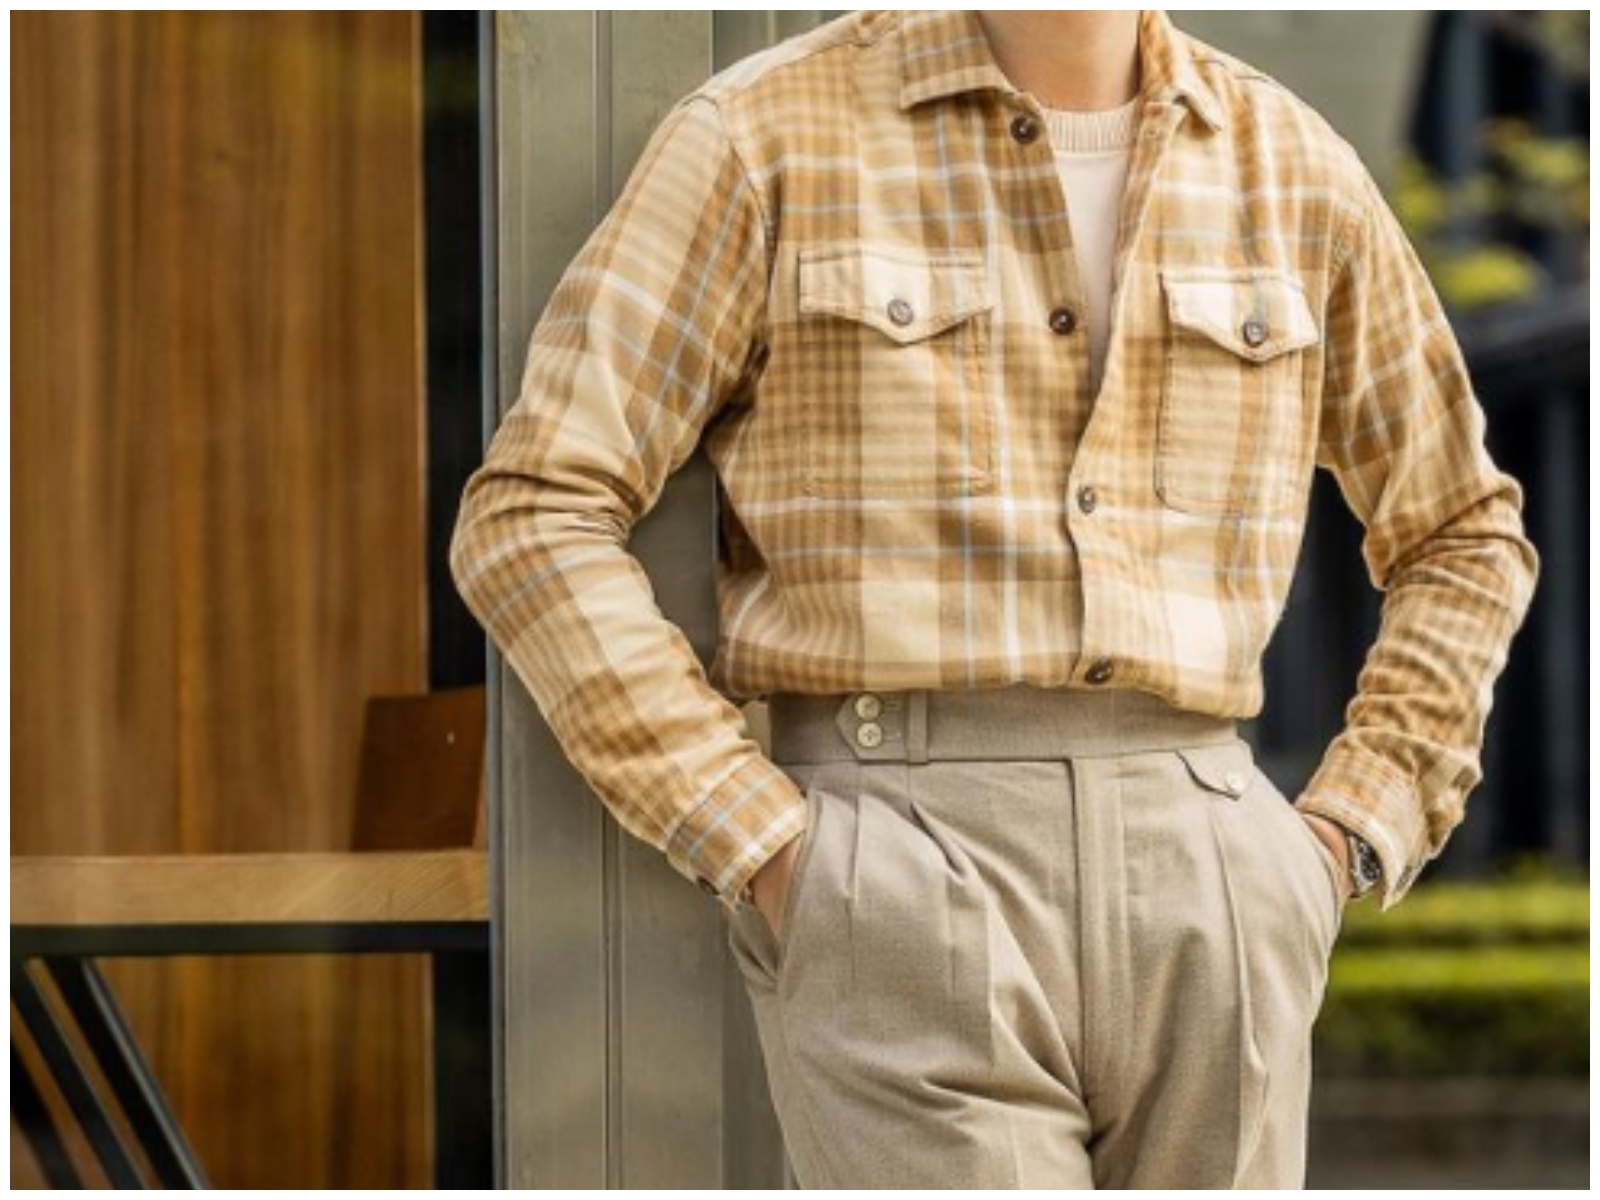 Men's business casual outfits